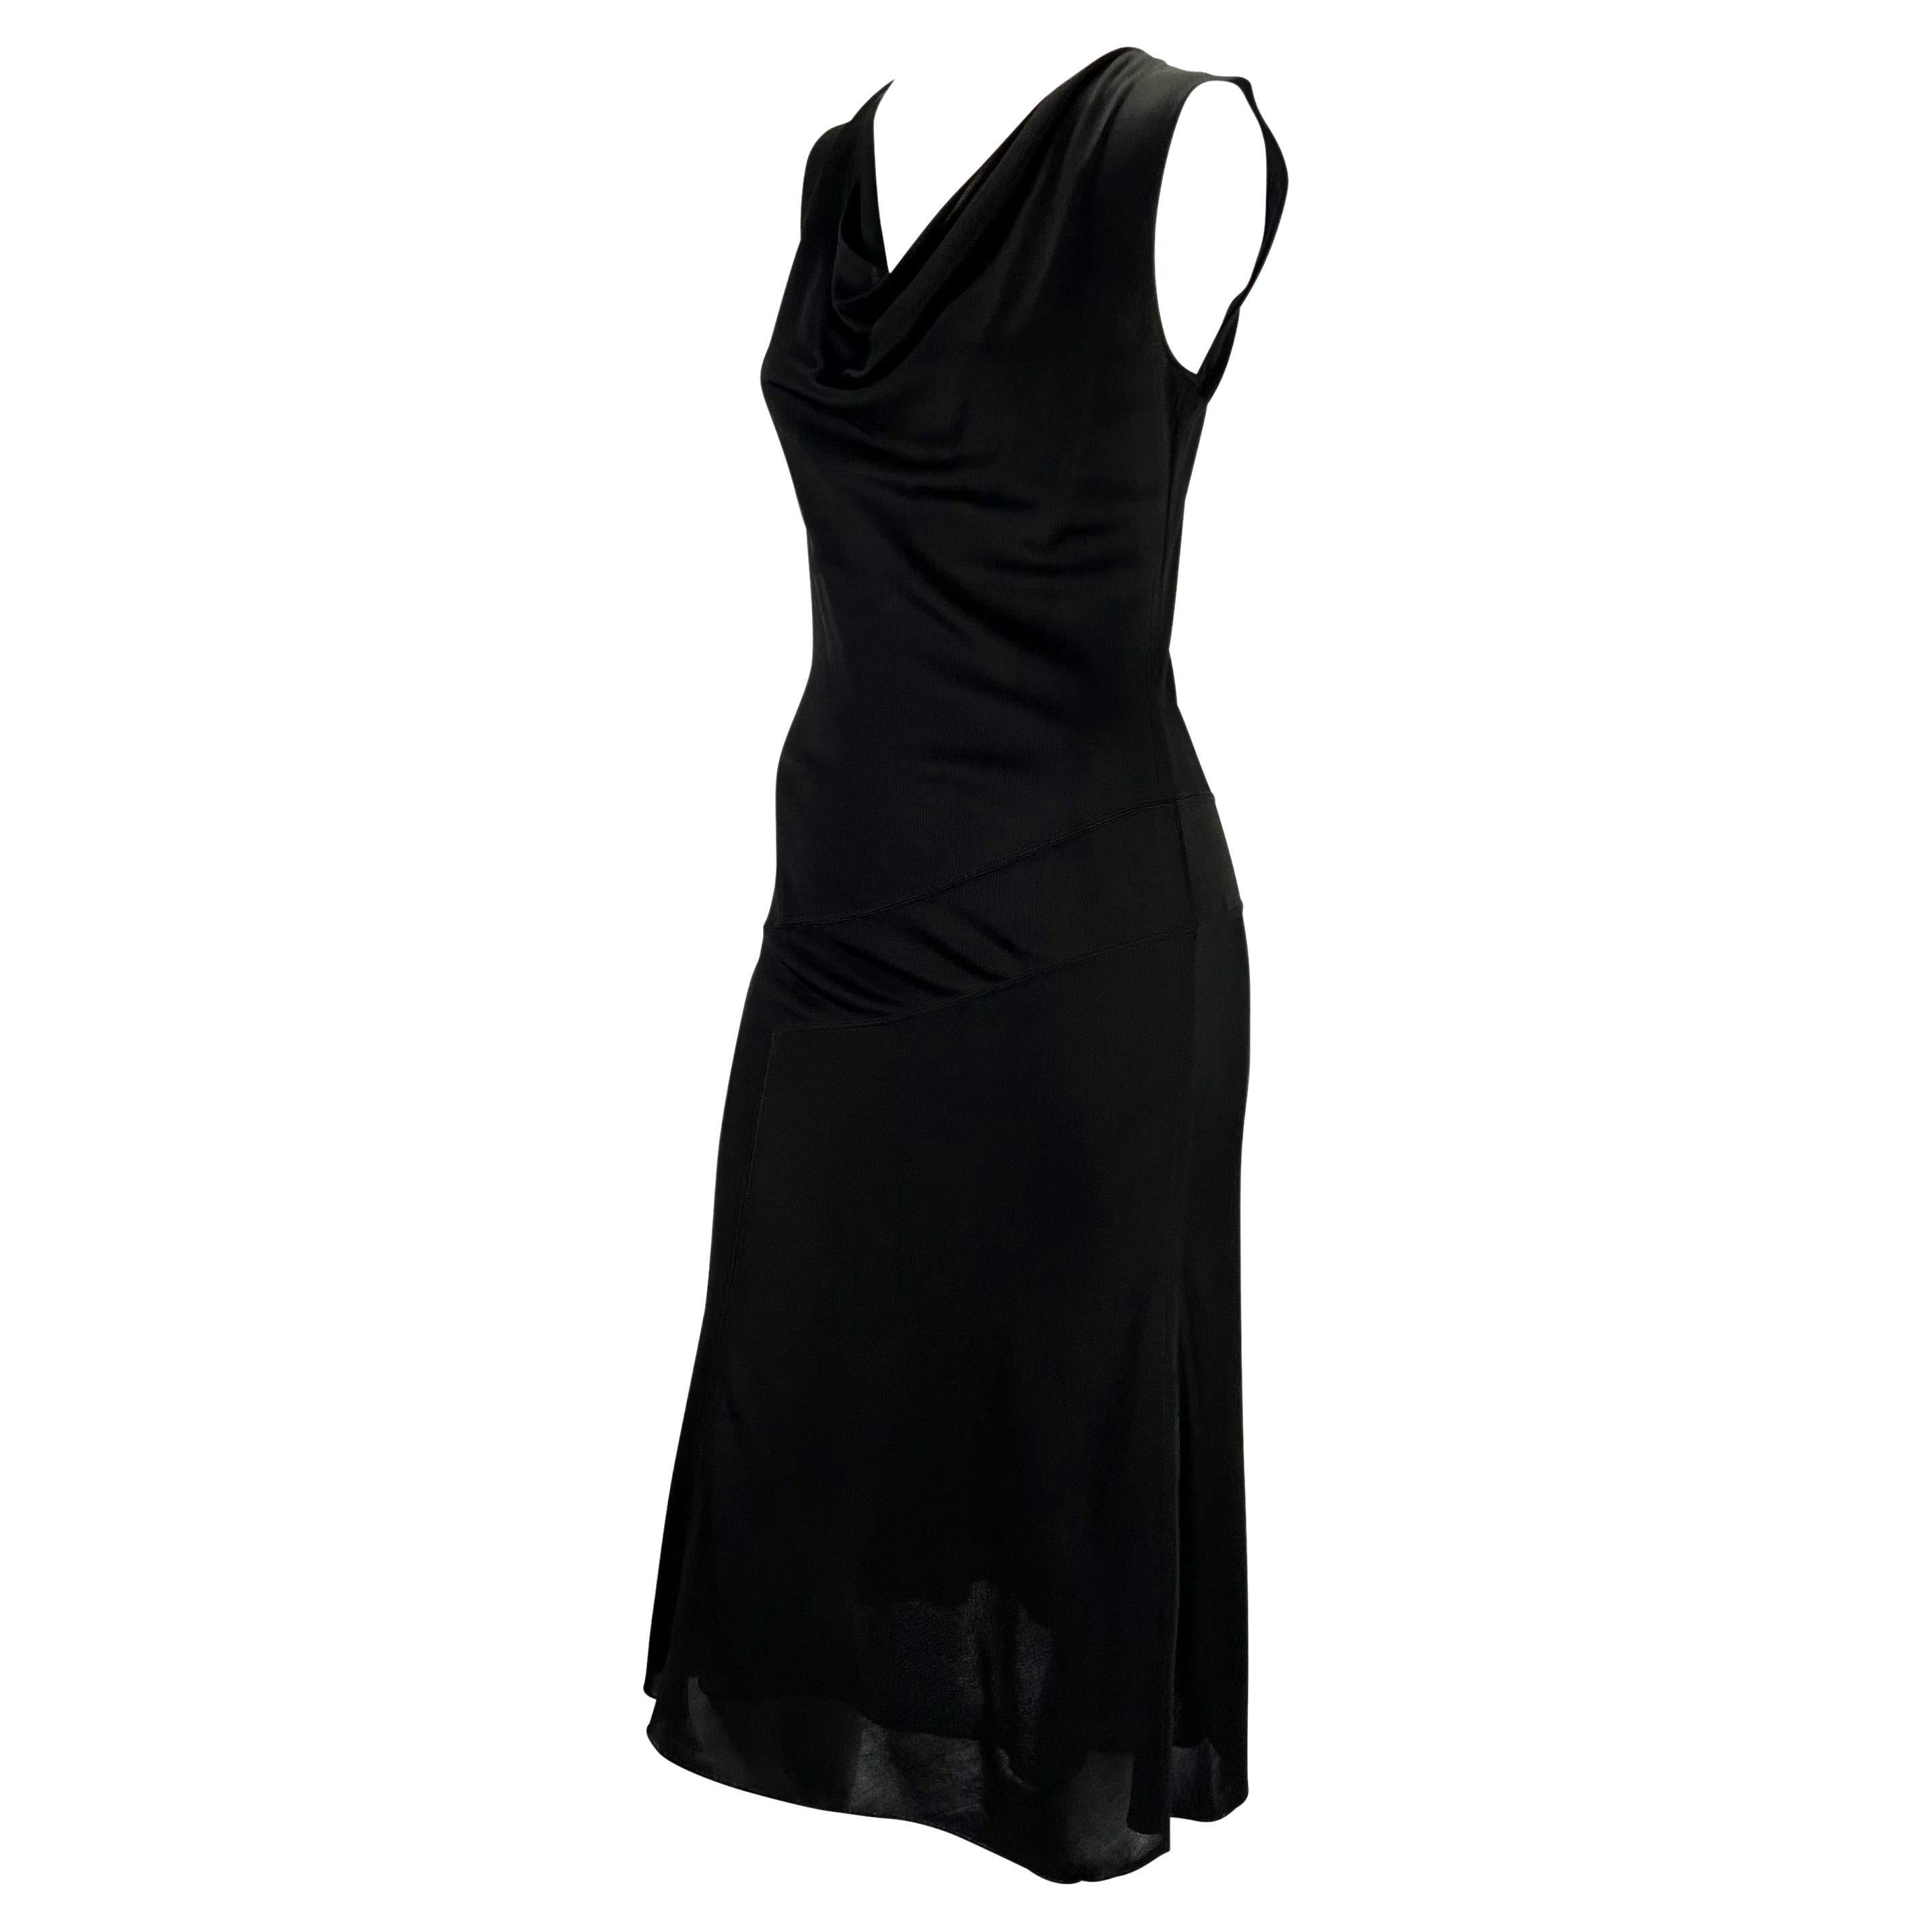 Presenting a sleeveless black cowlneck Gucci dress, designed by Tom Ford. From the early 2000s, this effortlessly chic and elegant dress is constructed of a stretchy knit material that allows the piece to hug your curves. The dress is made complete